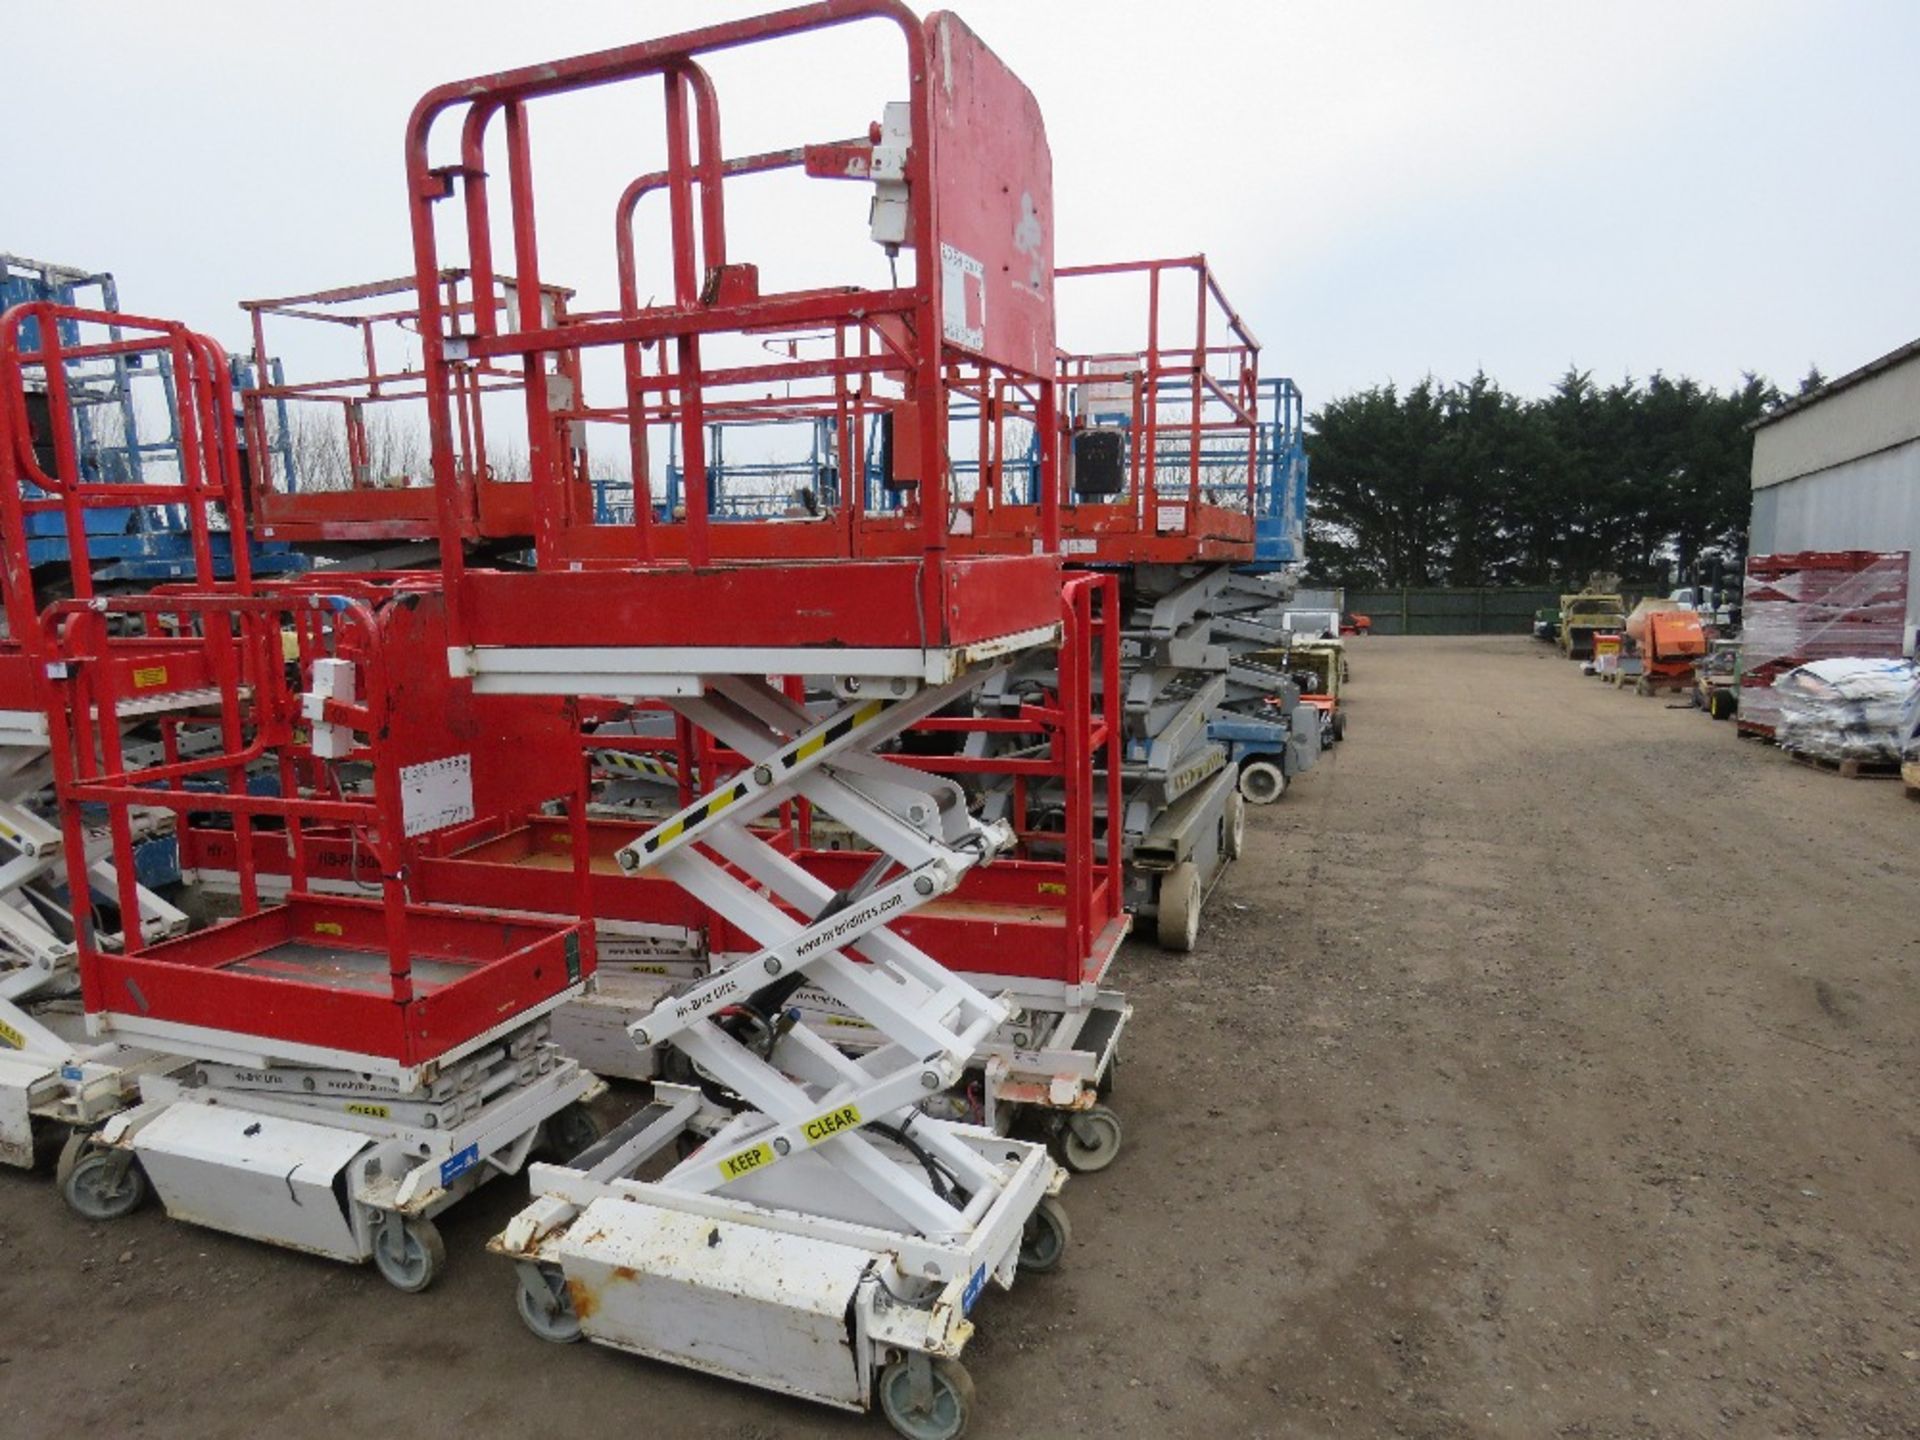 HYBRID HB830 SCISSOR LIFT ACCESS PLATFORM, 14FT MAX WORKING HEIGHT. SN:E0510097.WHEN TESTED WAS SEEN